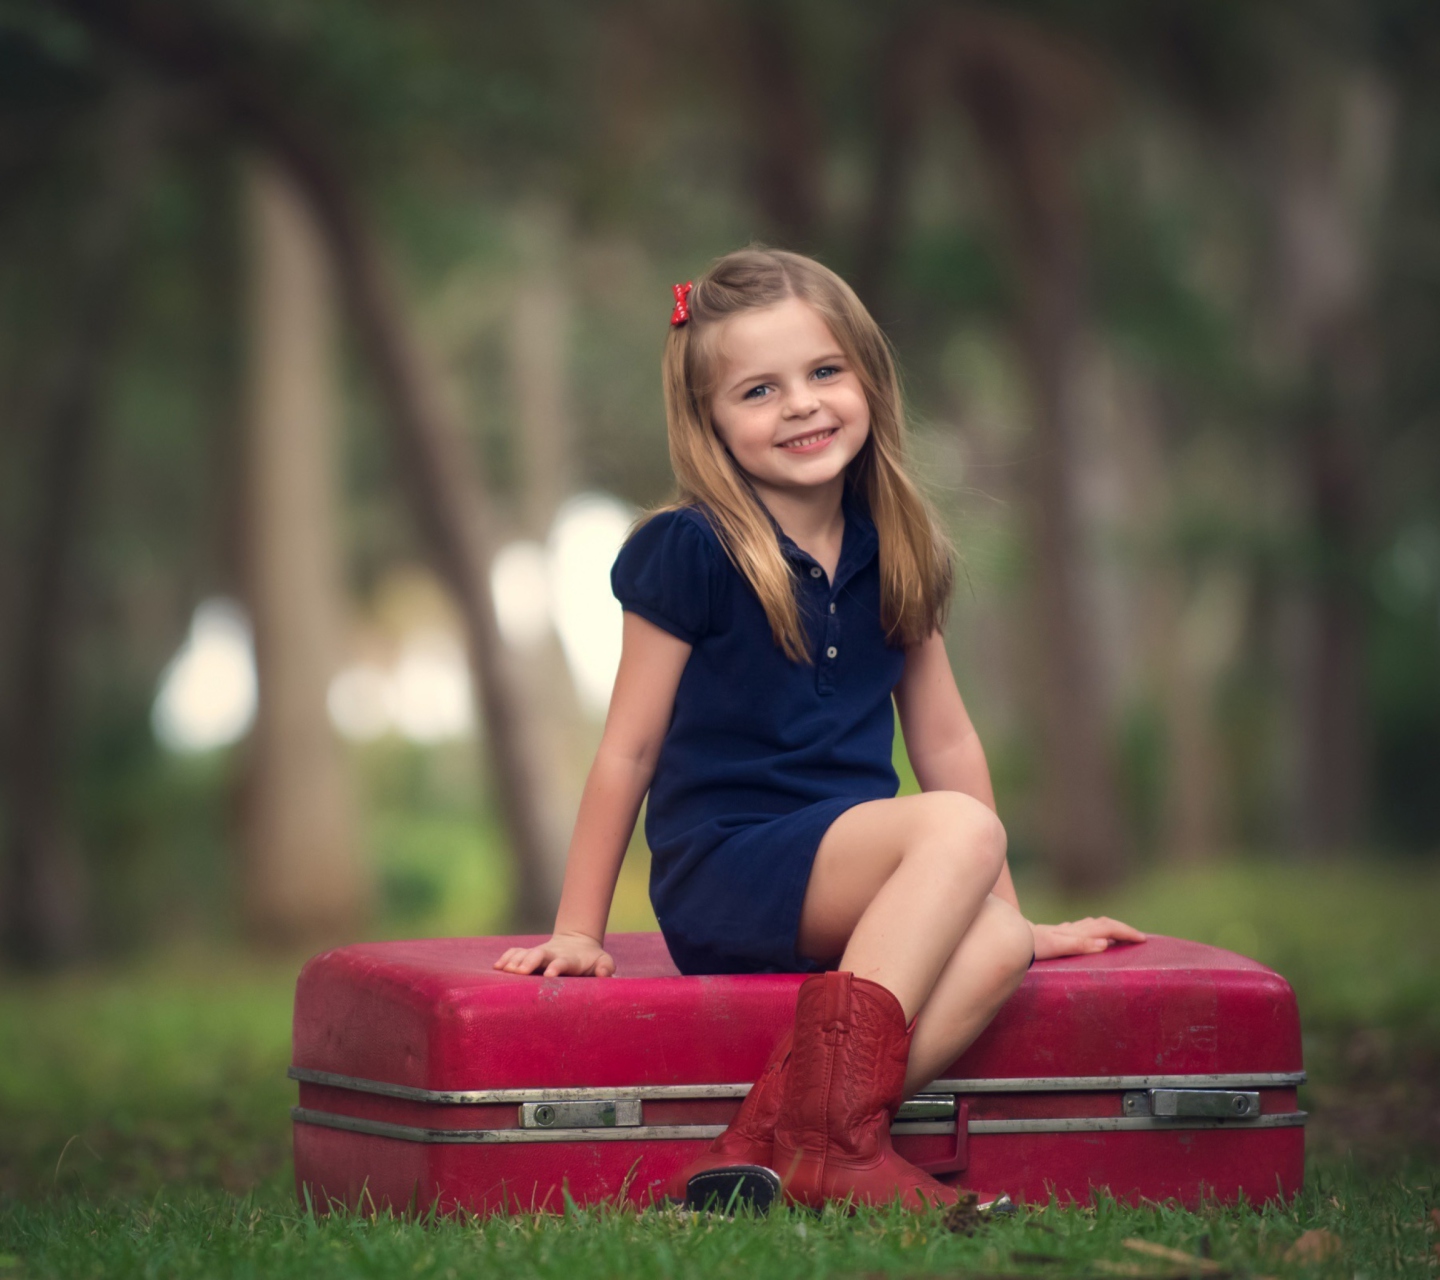 Обои Little Girl Sitting On Red Suitcase 1440x1280